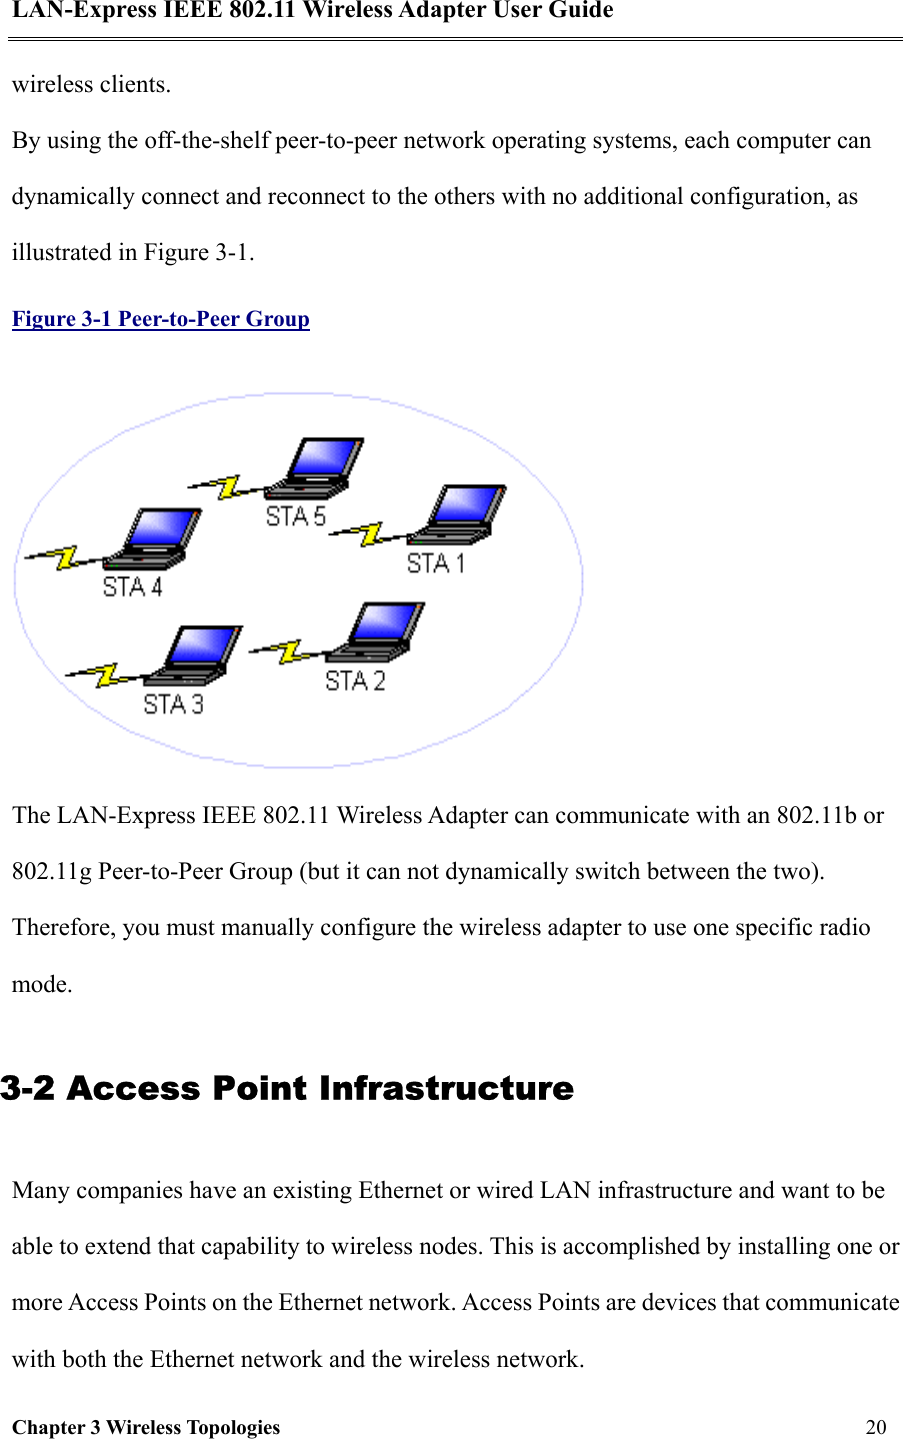 LAN-Express IEEE 802.11 Wireless Adapter User Guide Chapter 3 Wireless Topologies   20  wireless clients.  By using the off-the-shelf peer-to-peer network operating systems, each computer can dynamically connect and reconnect to the others with no additional configuration, as illustrated in Figure 3-1.  Figure 3-1 Peer-to-Peer Group  The LAN-Express IEEE 802.11 Wireless Adapter can communicate with an 802.11b or 802.11g Peer-to-Peer Group (but it can not dynamically switch between the two). Therefore, you must manually configure the wireless adapter to use one specific radio mode.  3-2 Access Point Infrastructure Many companies have an existing Ethernet or wired LAN infrastructure and want to be able to extend that capability to wireless nodes. This is accomplished by installing one or more Access Points on the Ethernet network. Access Points are devices that communicate with both the Ethernet network and the wireless network.  